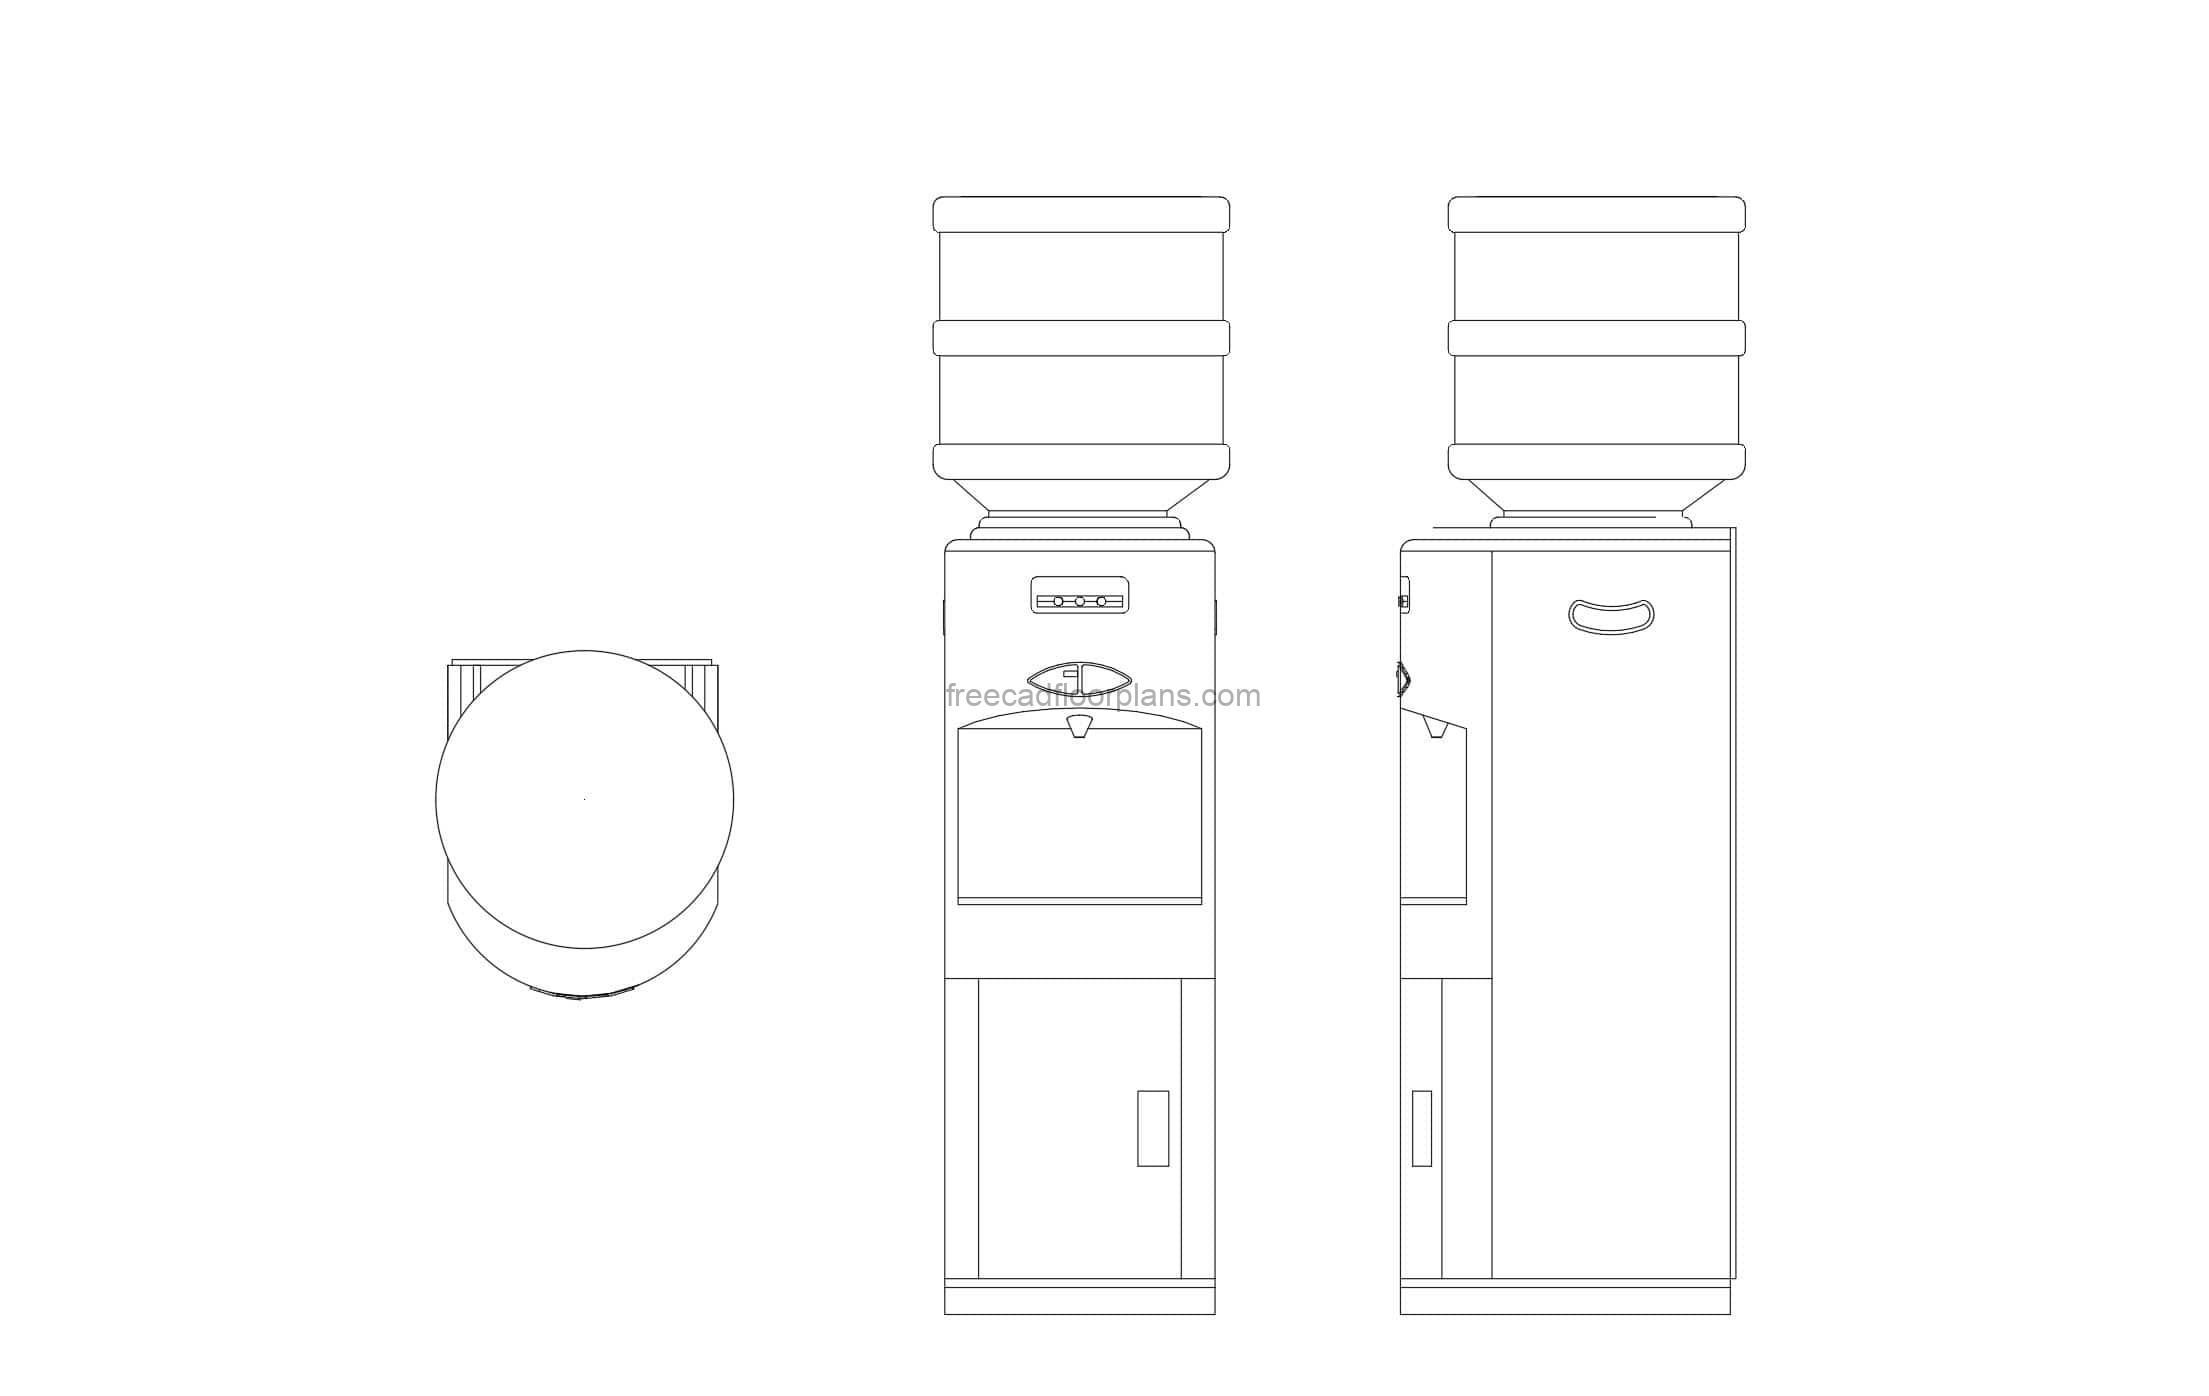 water dispenser drawing in dwg format all 2d views for free download